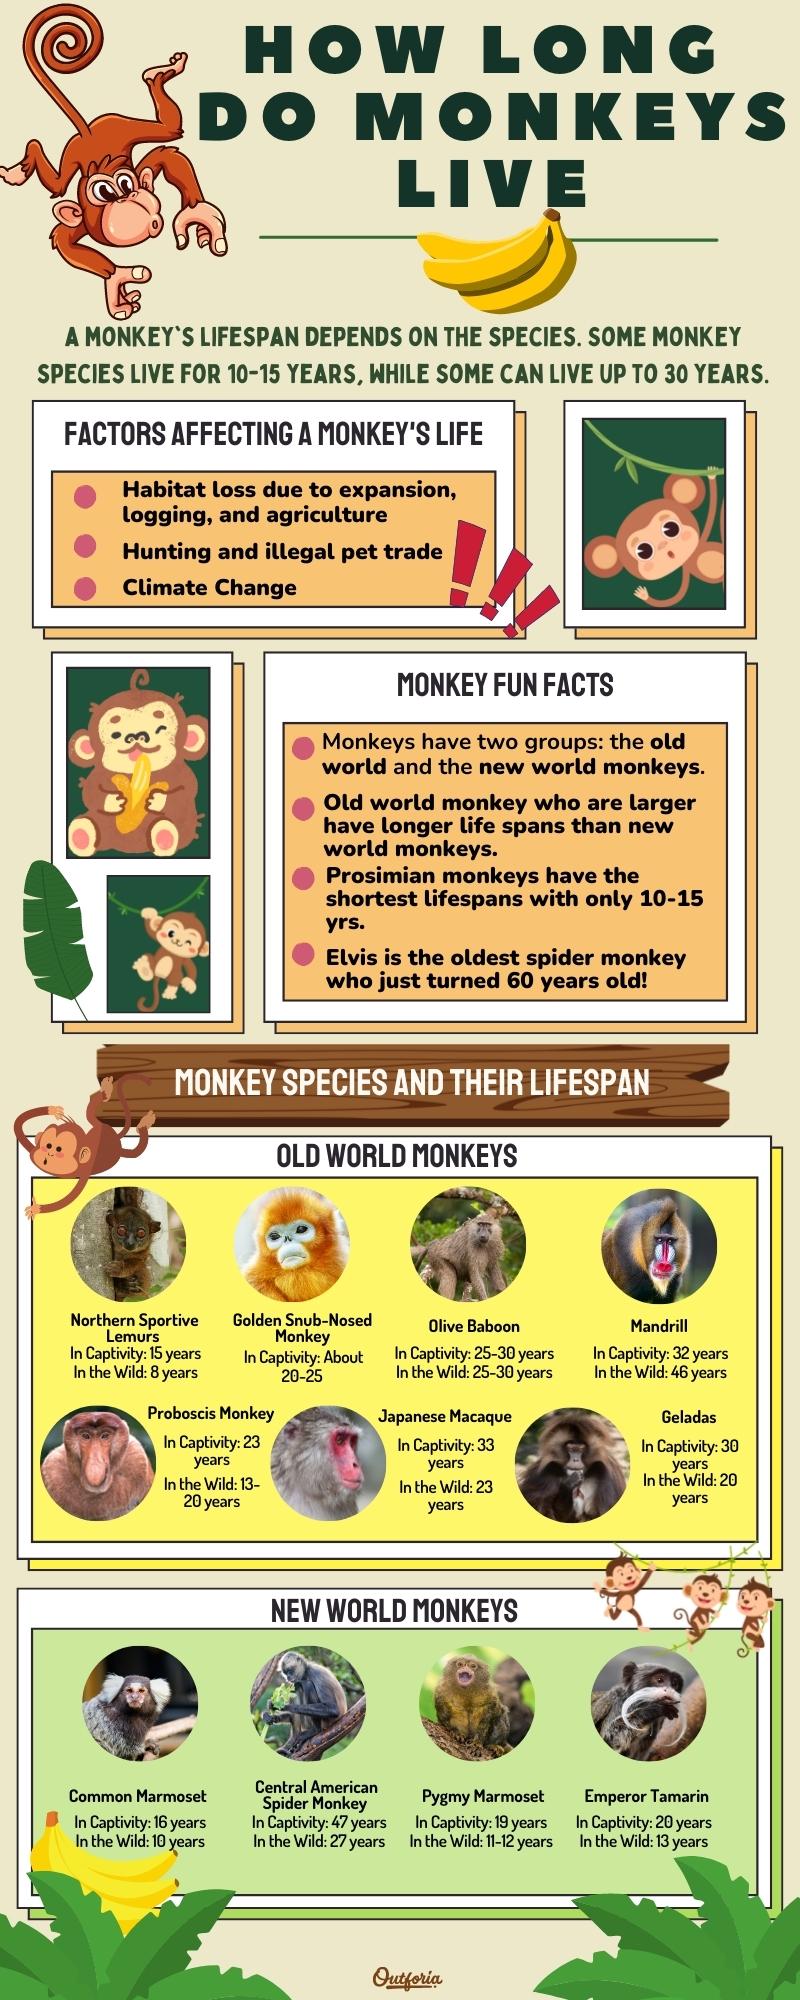 how long do monkeys live chart with facts and different monkey species' lifespan